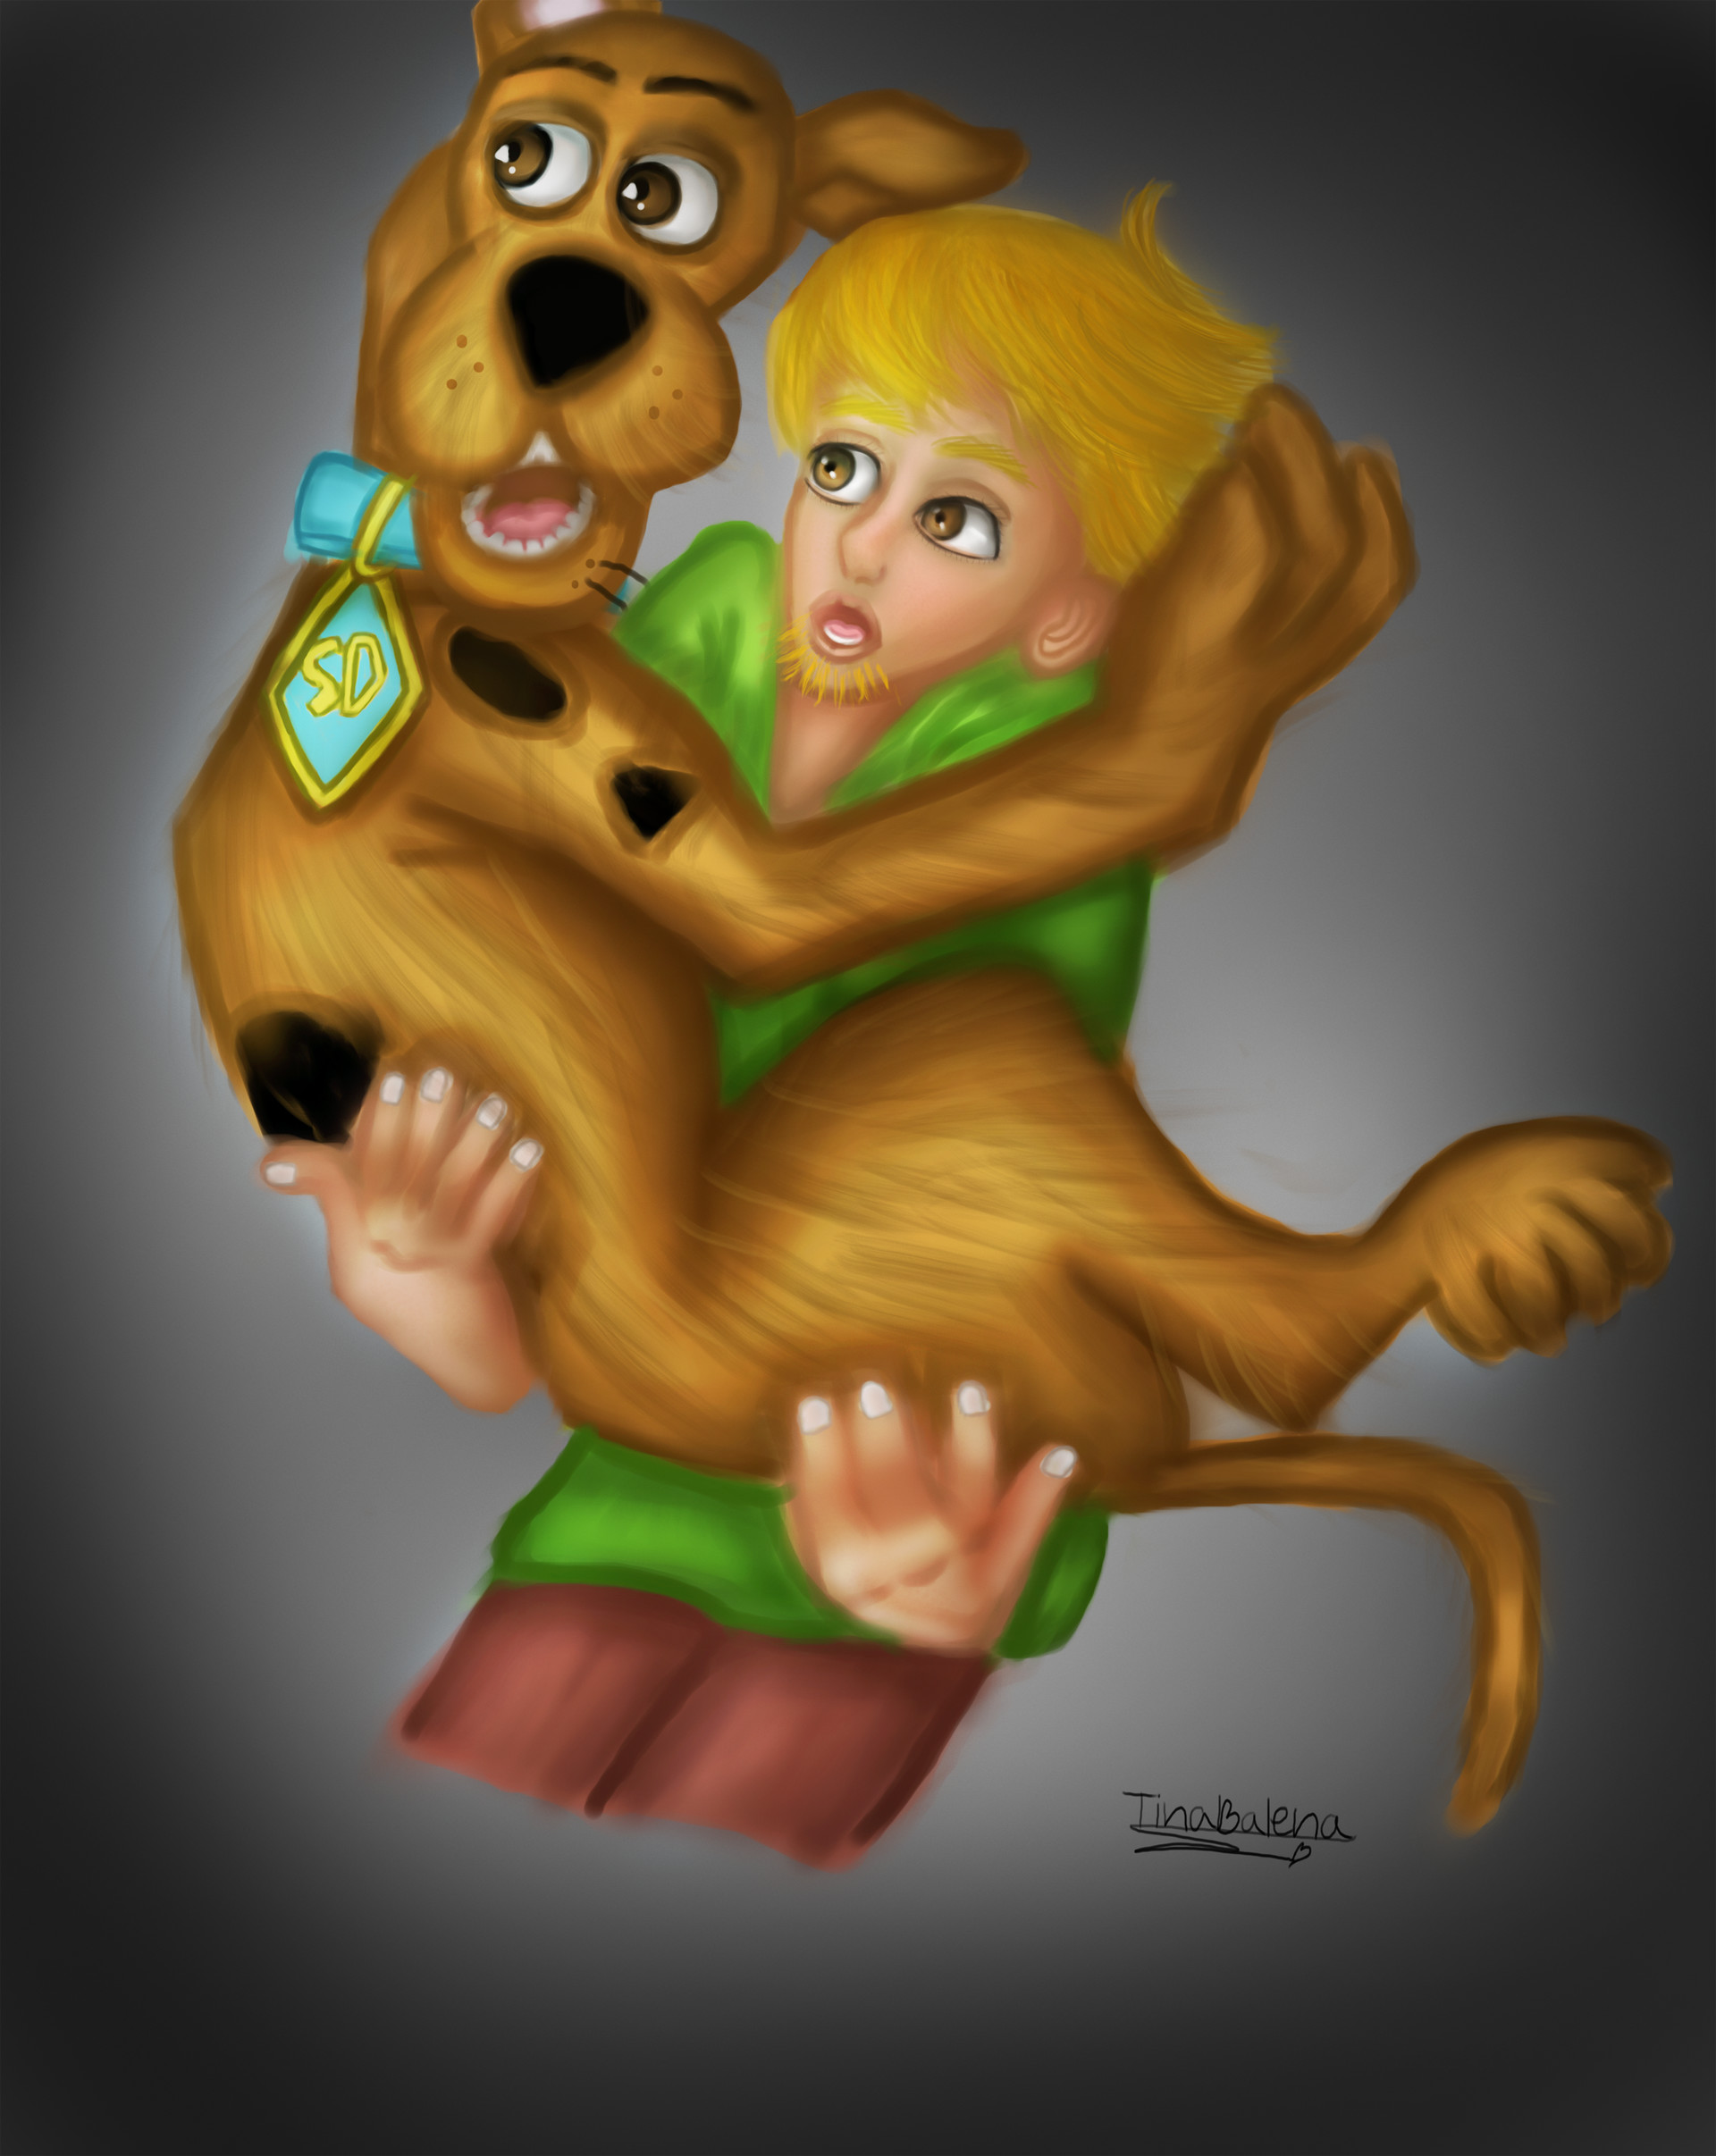 shaggy and scooby scared